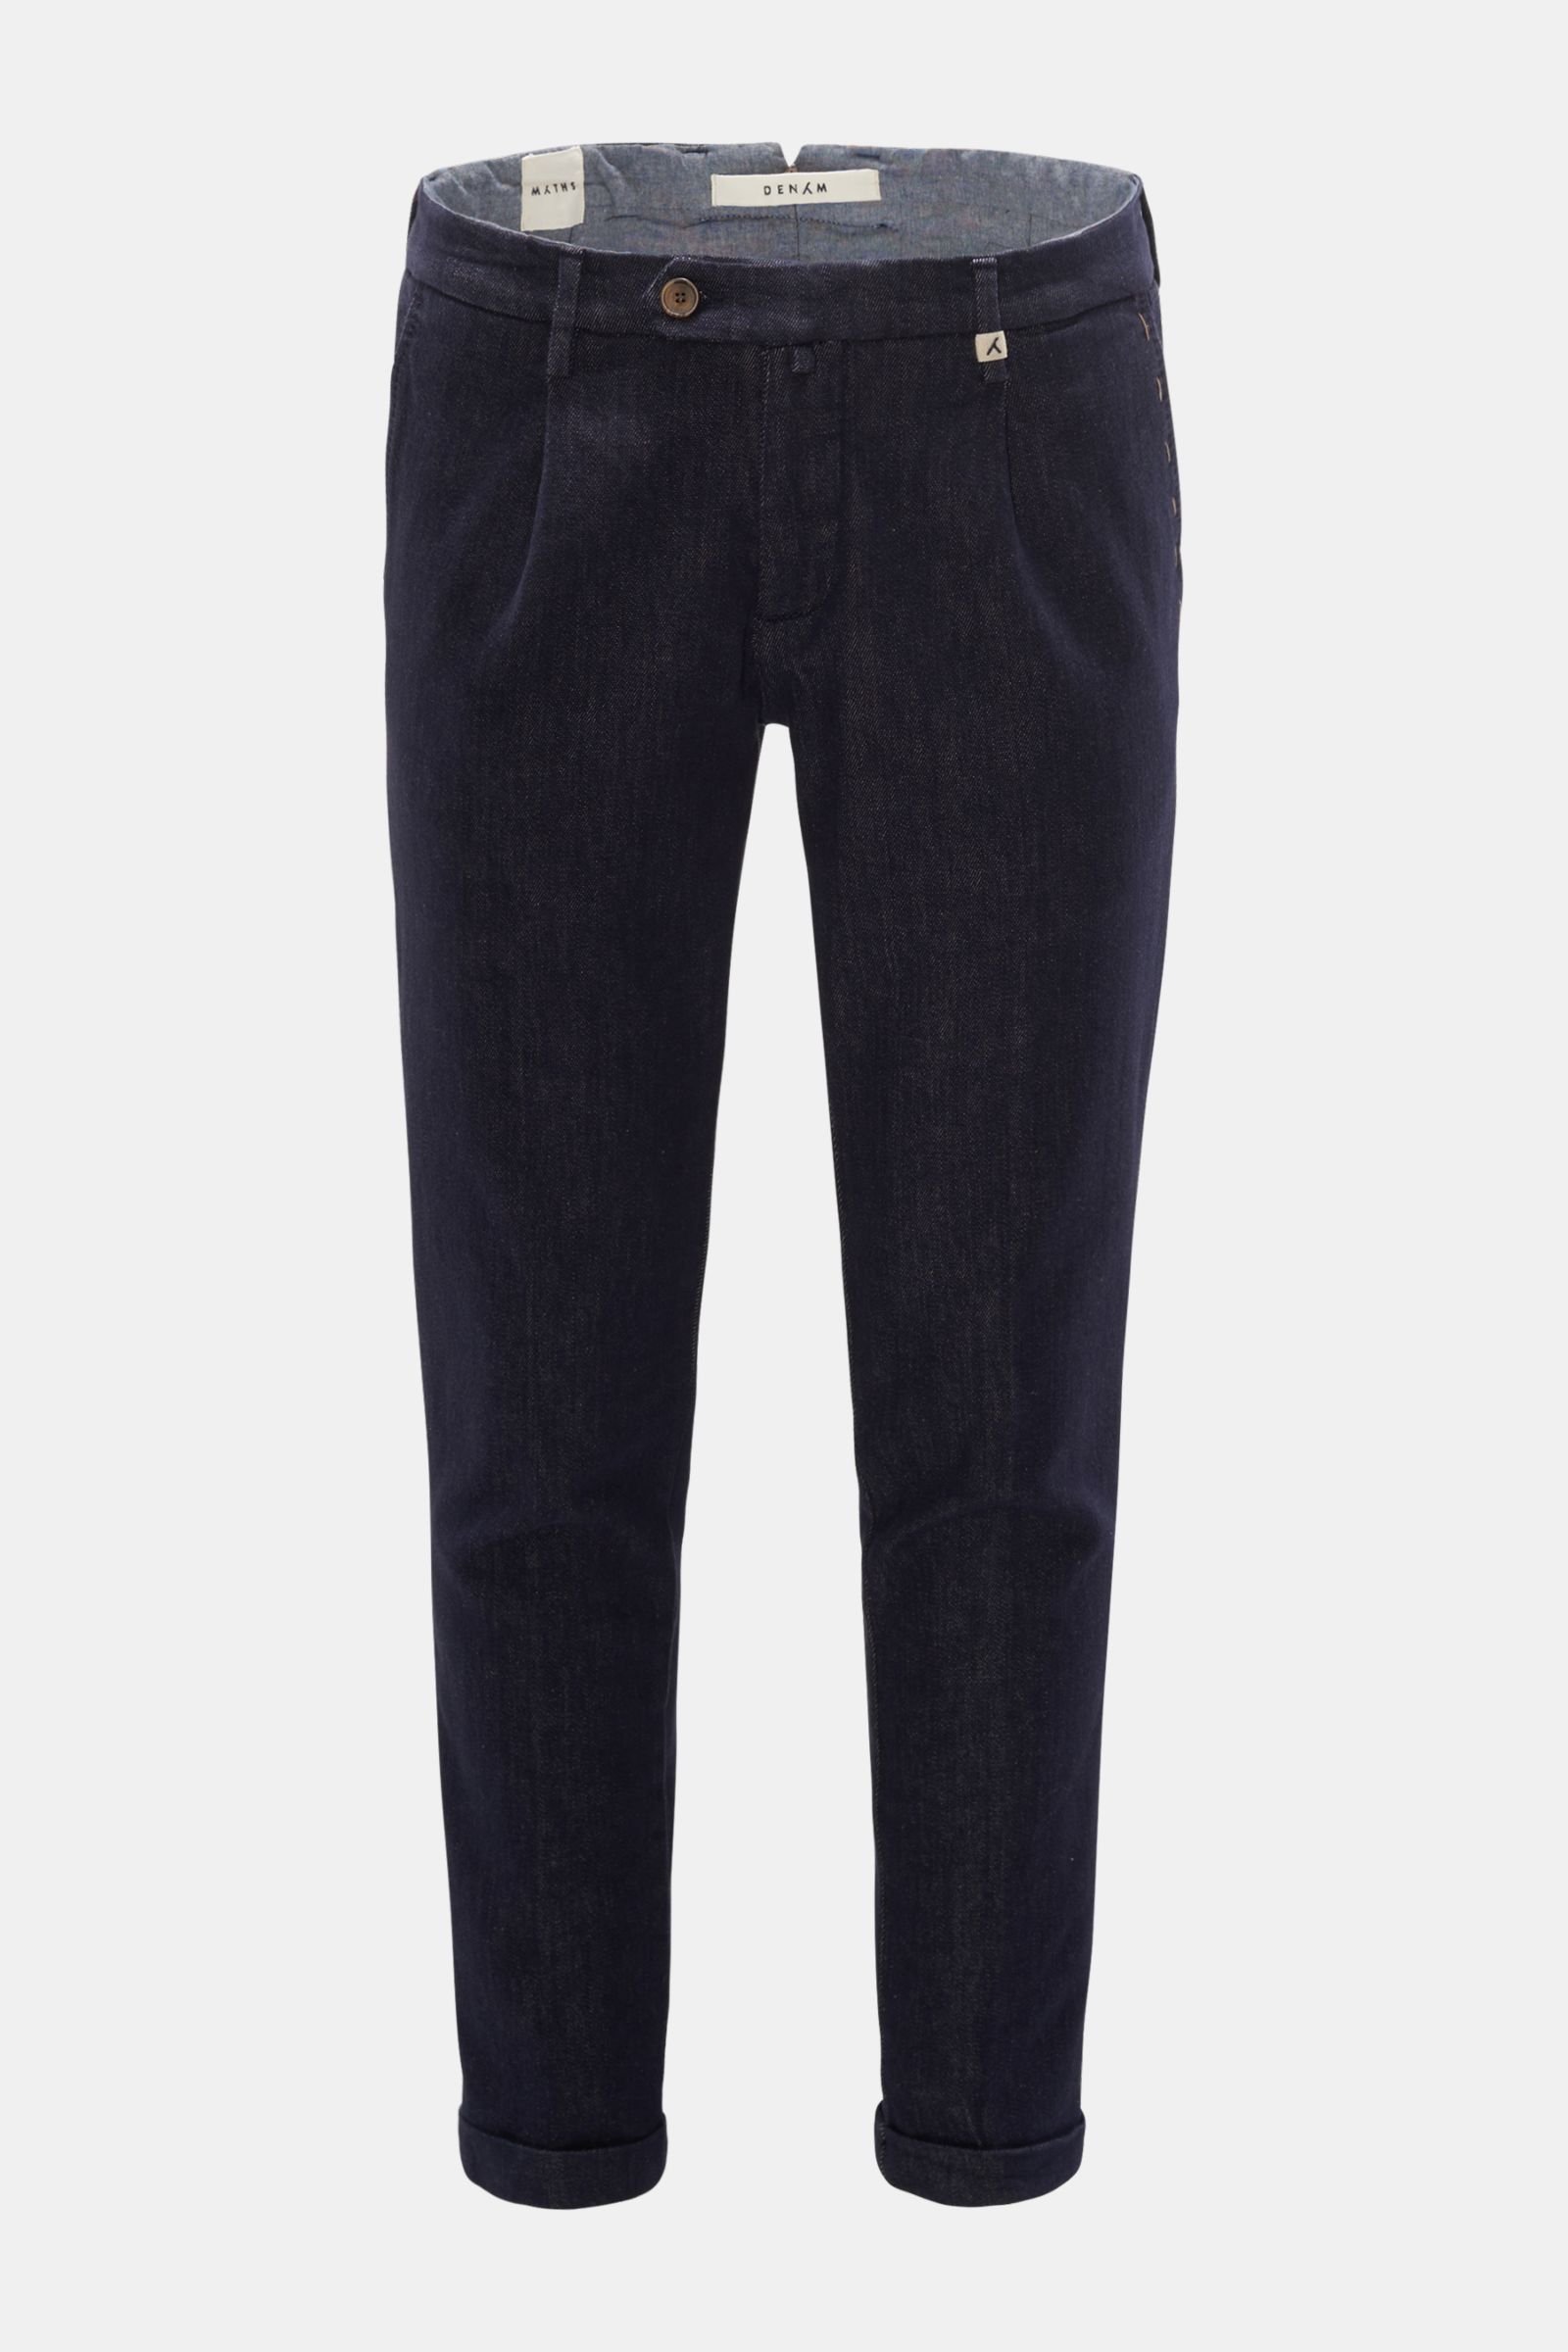 Cotton trousers navy 